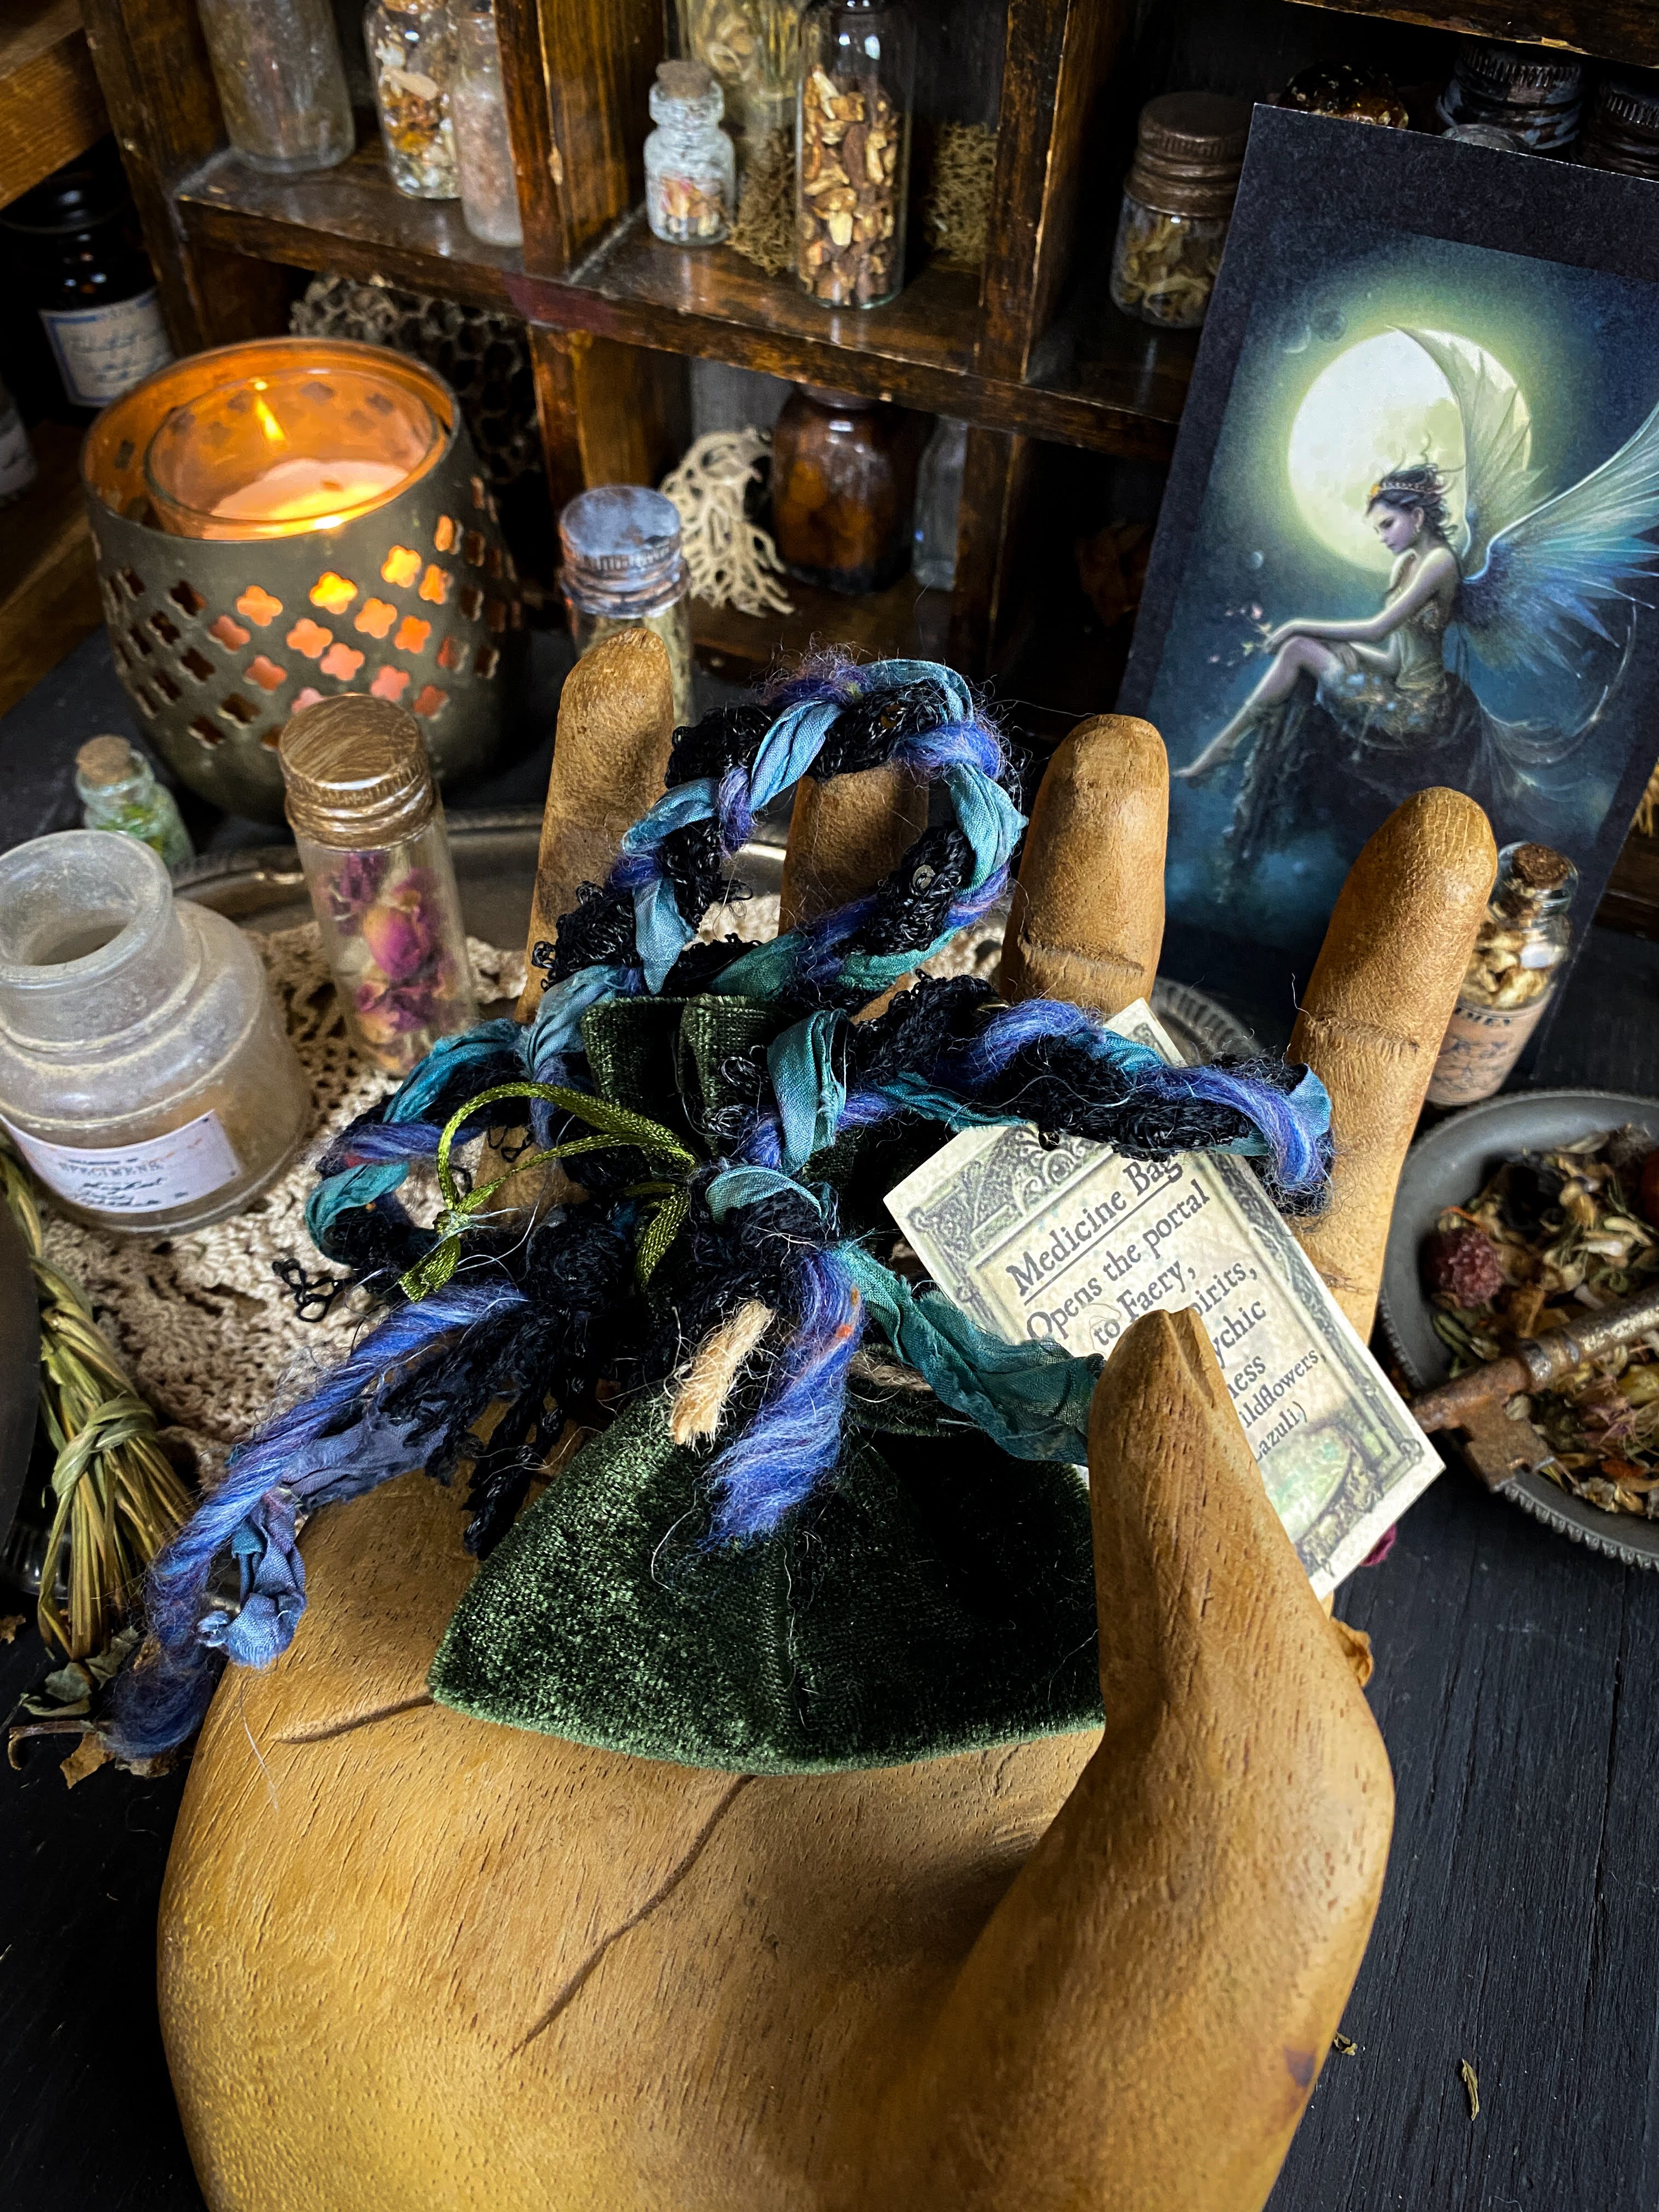 Intuitively Crafted Medicine Bag - Opens the Portal to Faery + Enhances Psychic Awareness